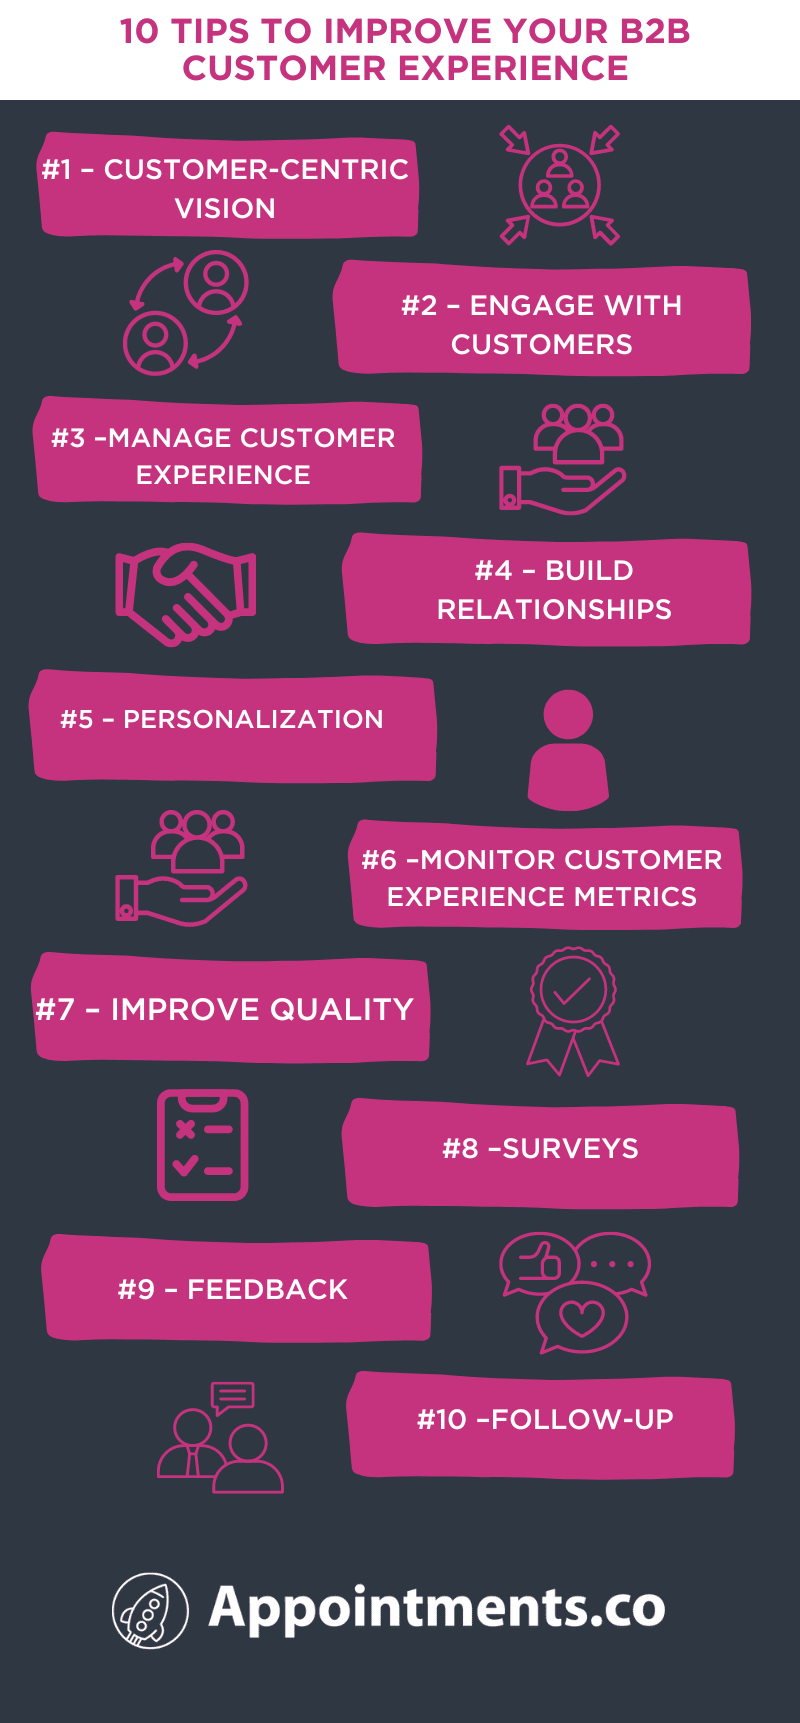 10 Tips to Improve Your B2B Customer Experience